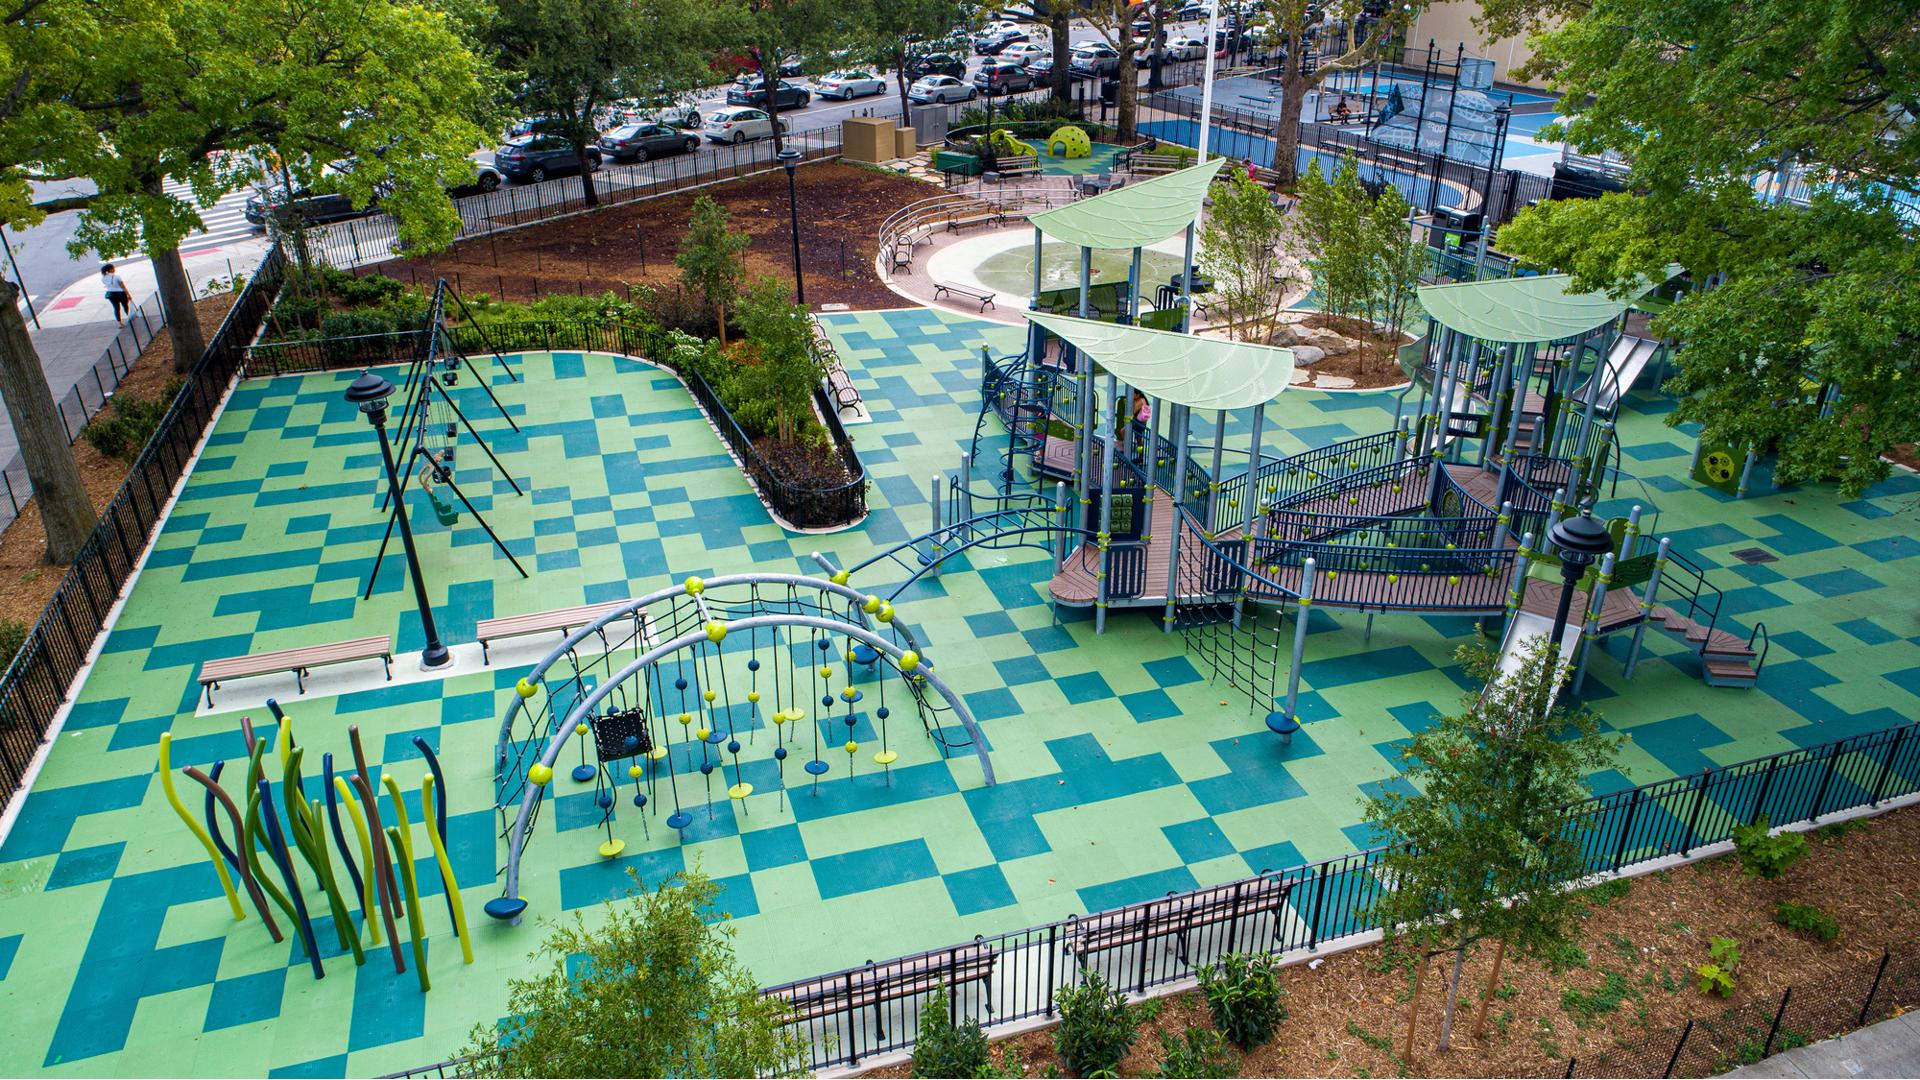 Elevated view of a city nature themed playground with scattered square safety tile surfacing in different shades of green.